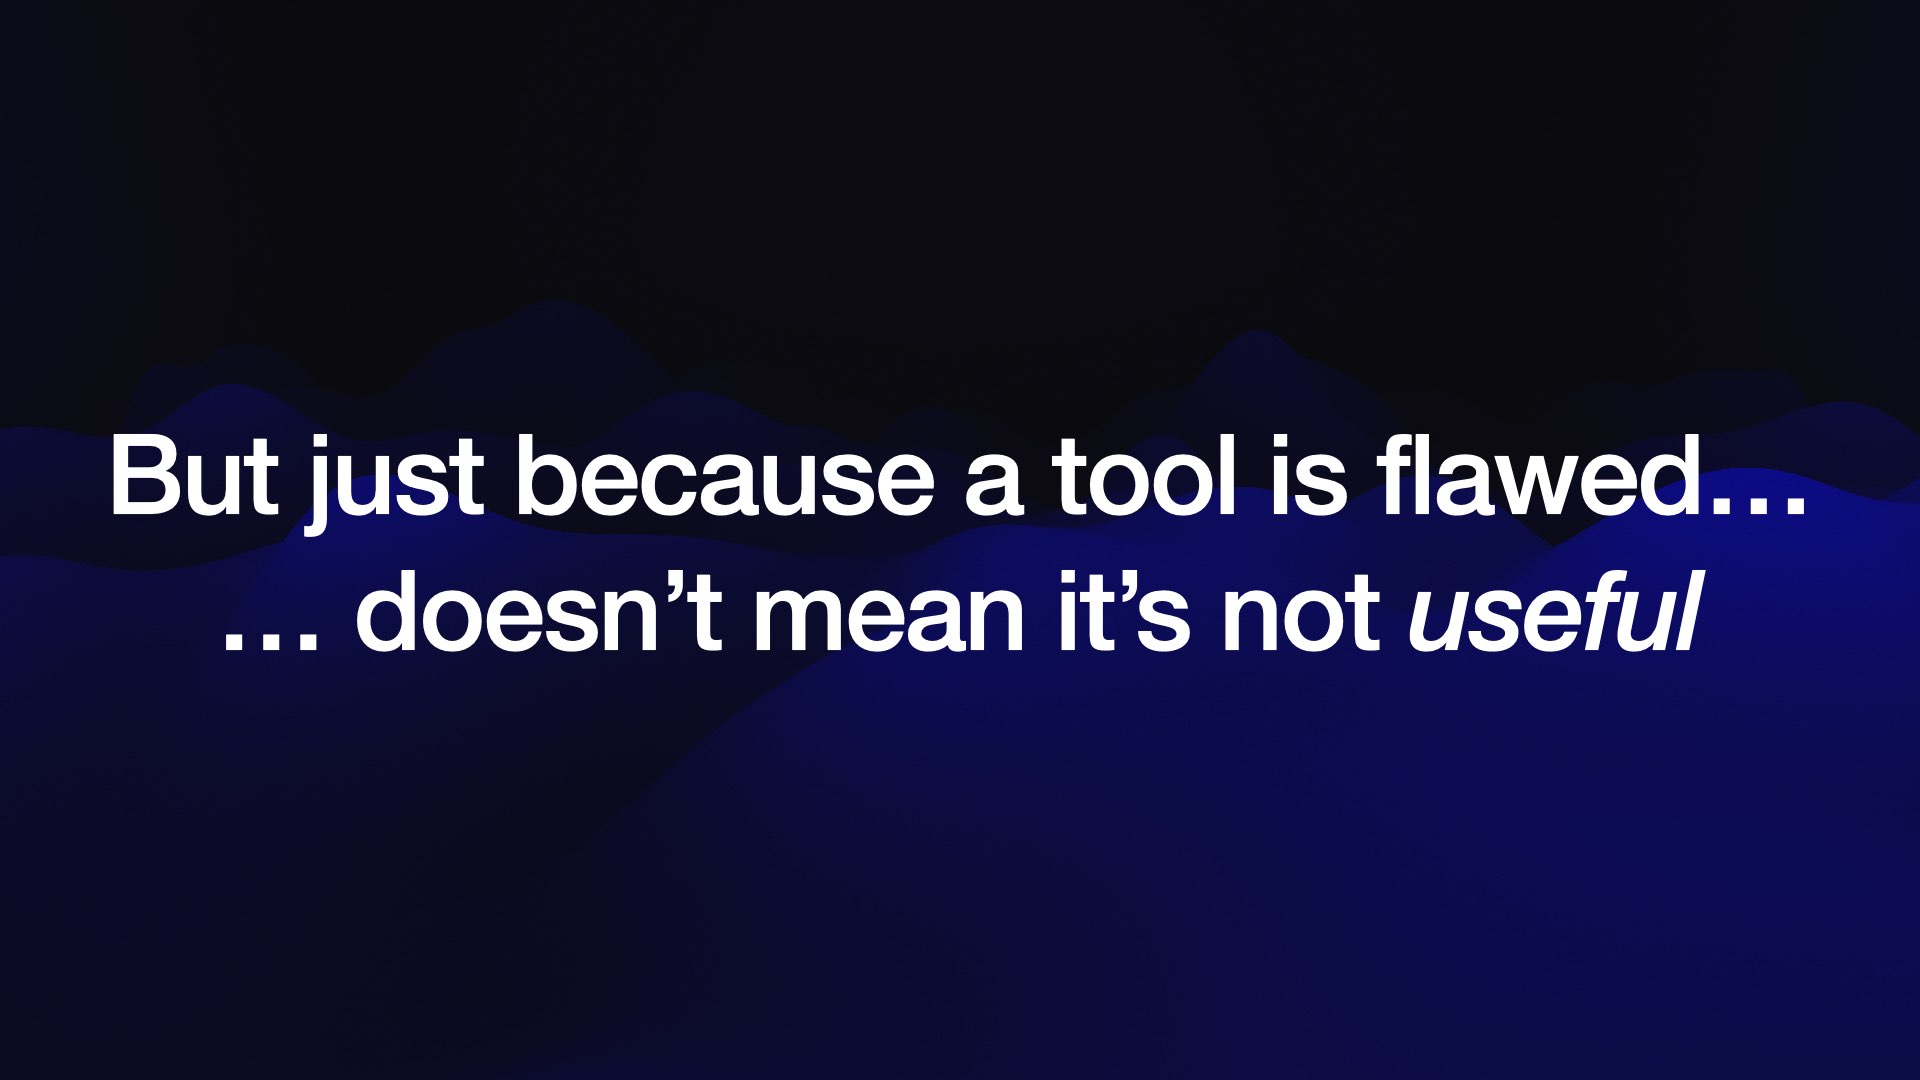 But just because a tool is flawed... ... doesn’t mean it’s not useful 